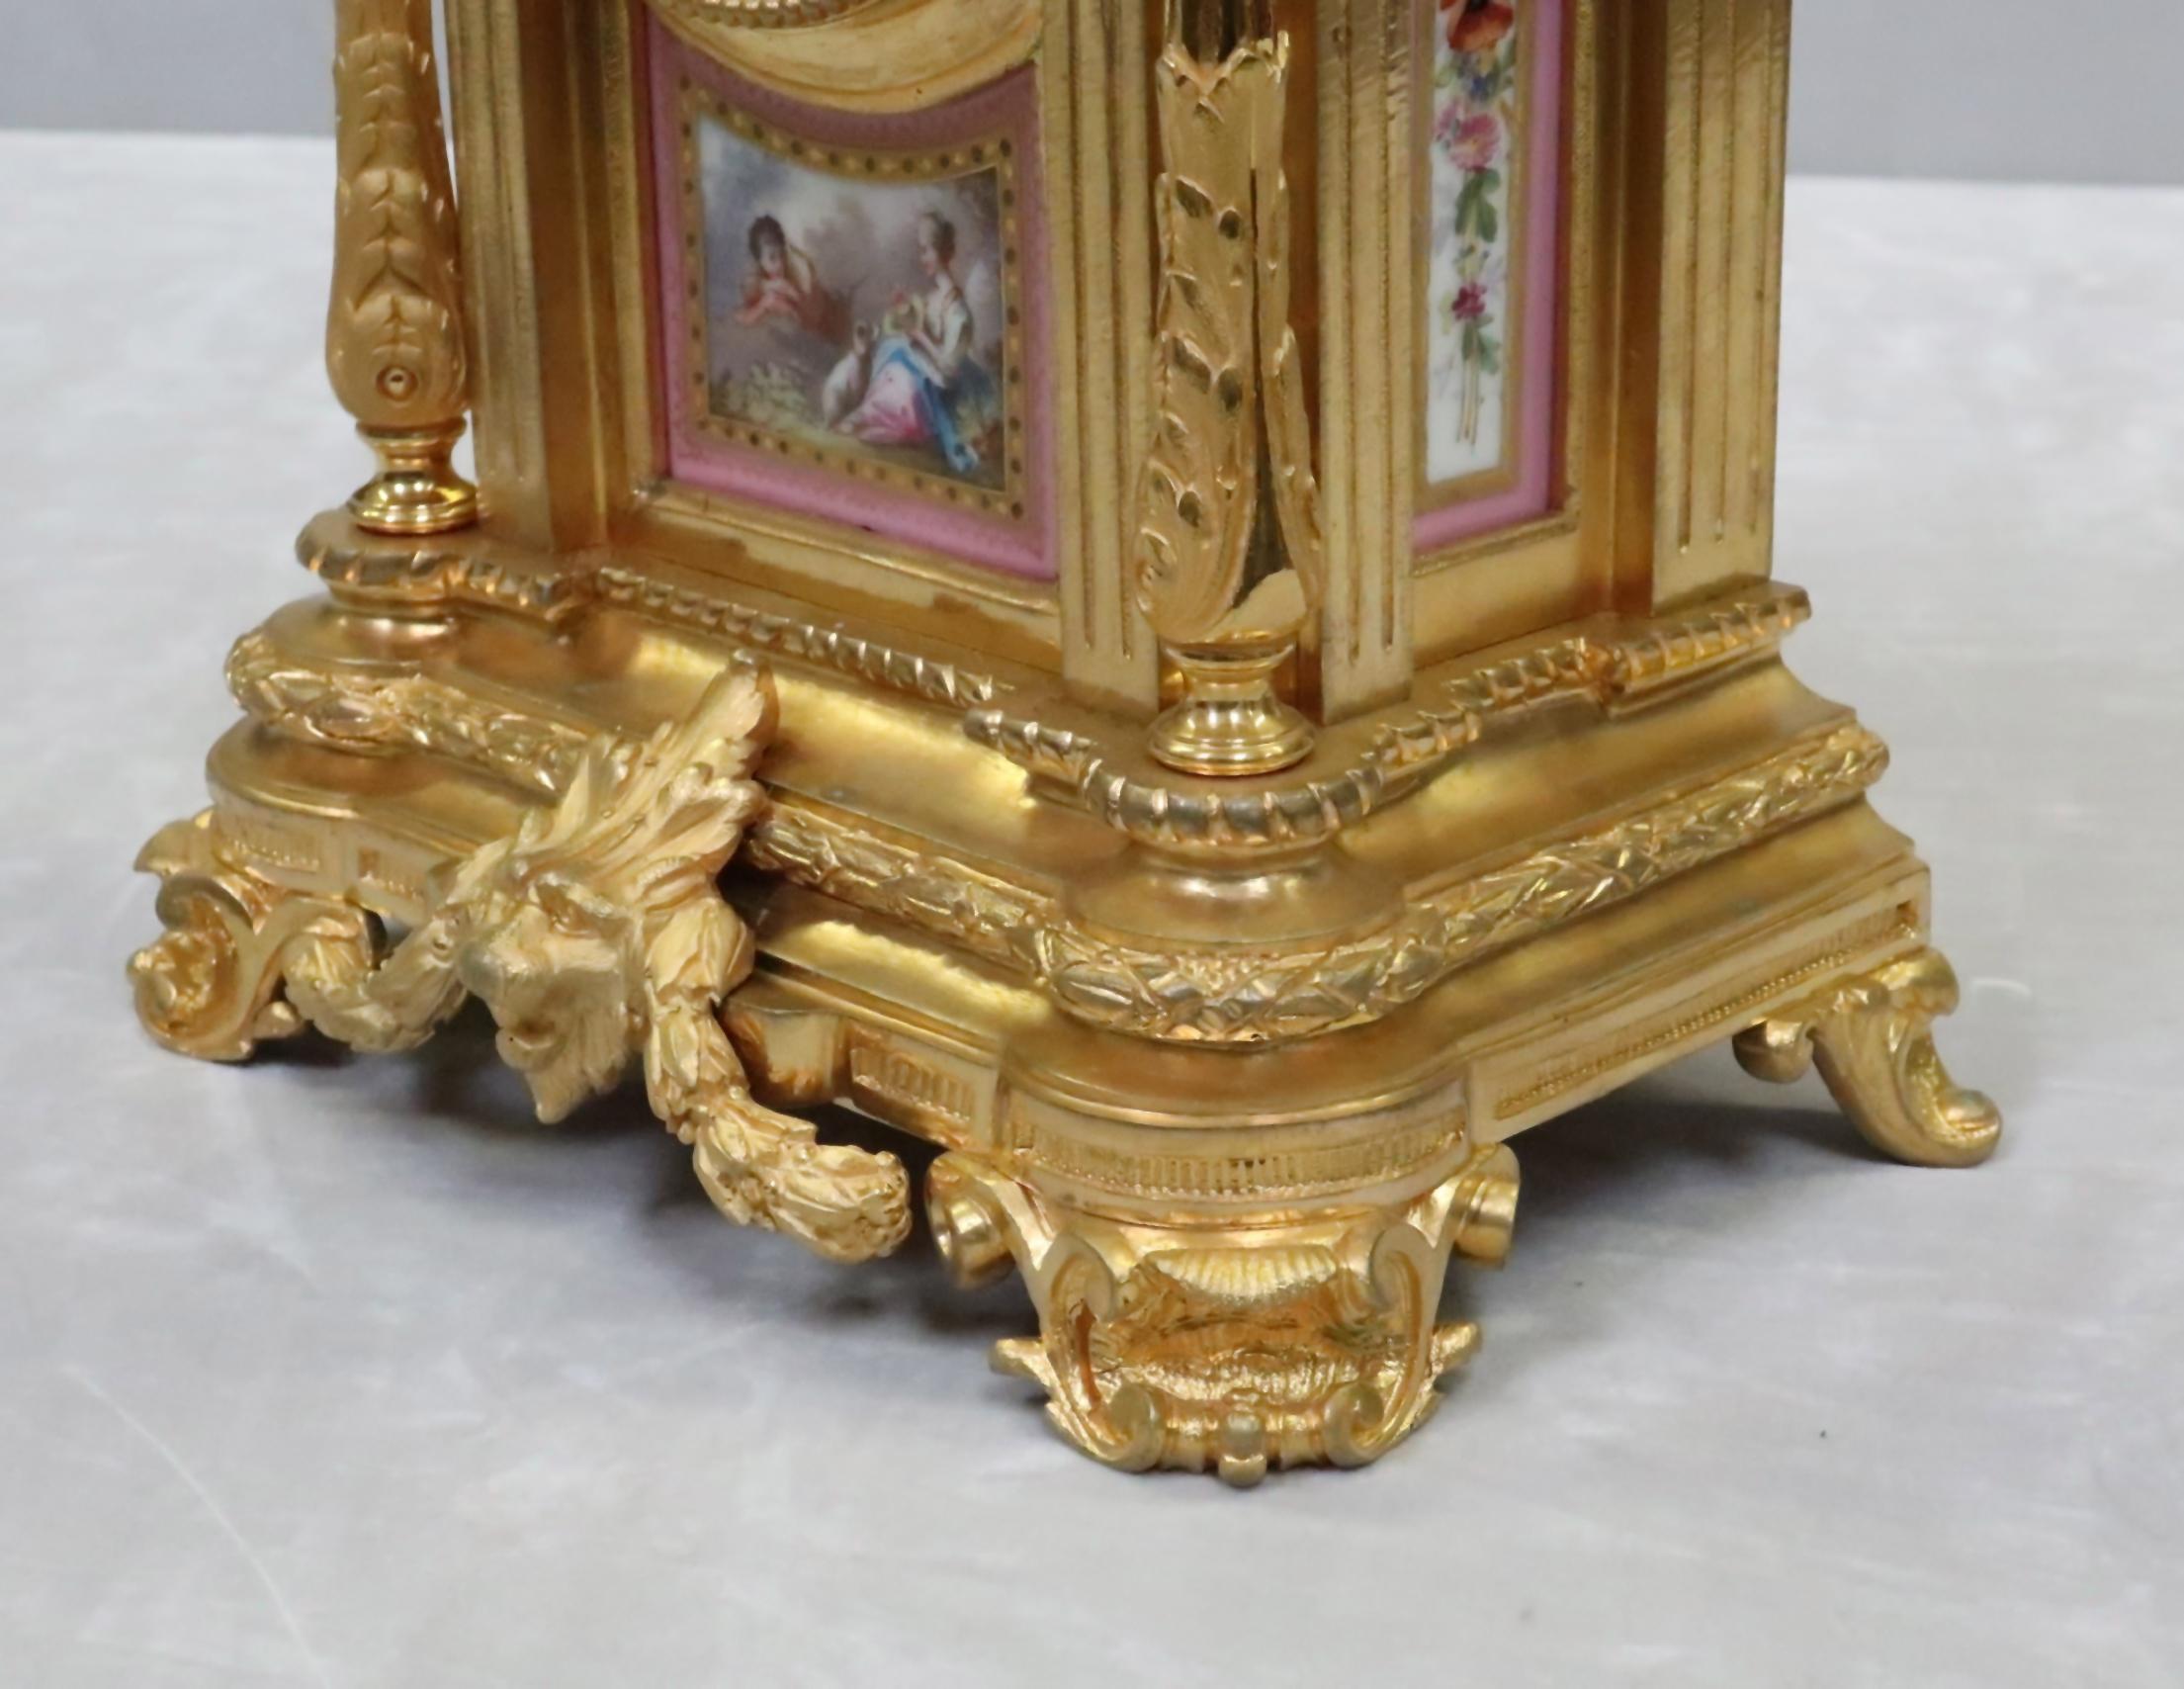 French Napoleon III Bronze Gilt and Porcelain Mantel Clock by Japy Freres In Good Condition For Sale In Macclesfield, GB